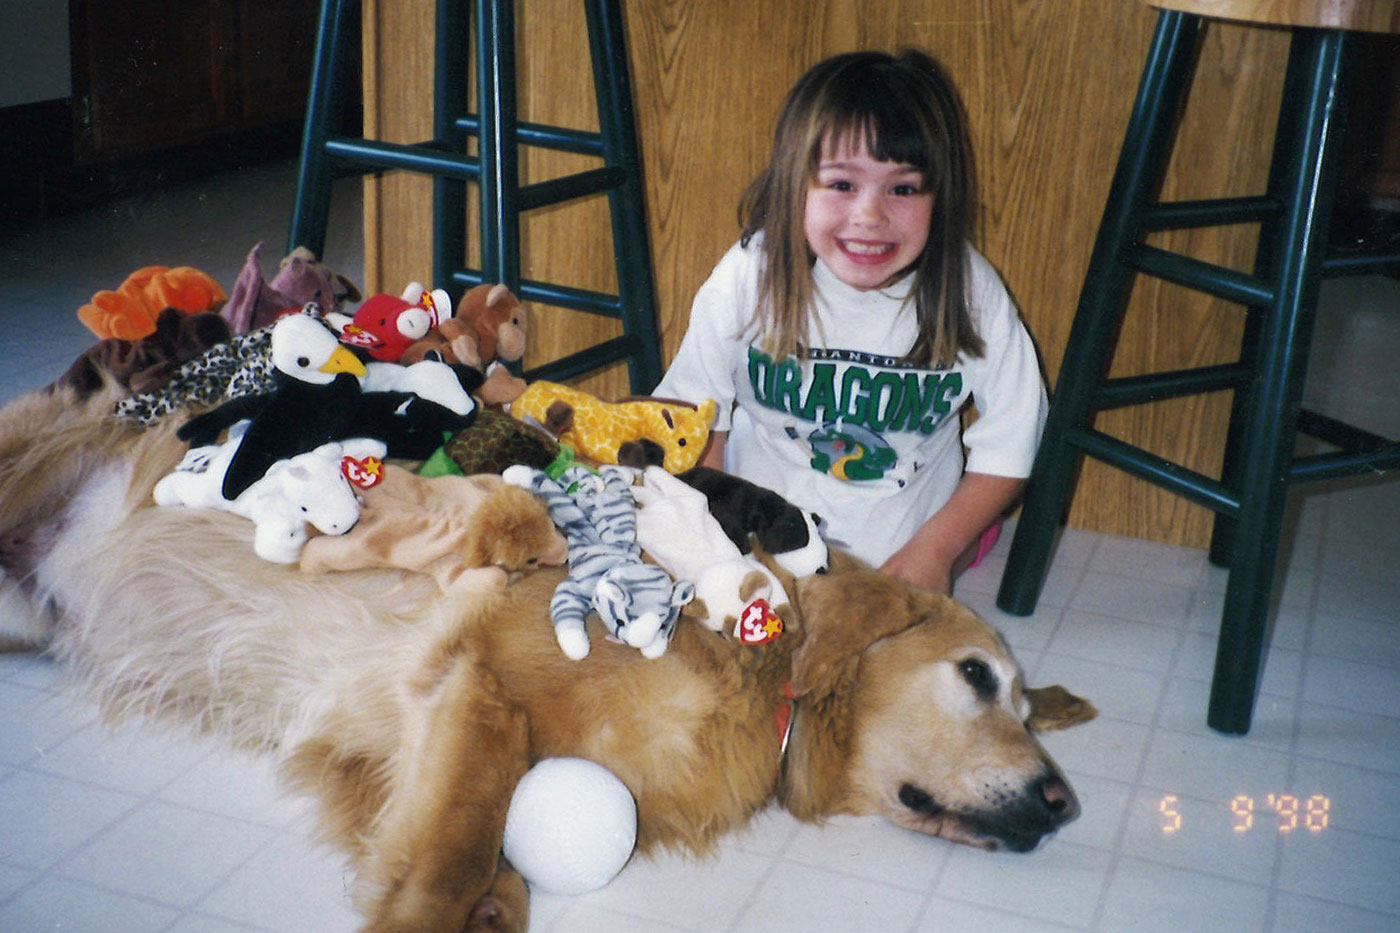 Megan Sprague with her dog and stuffed animals